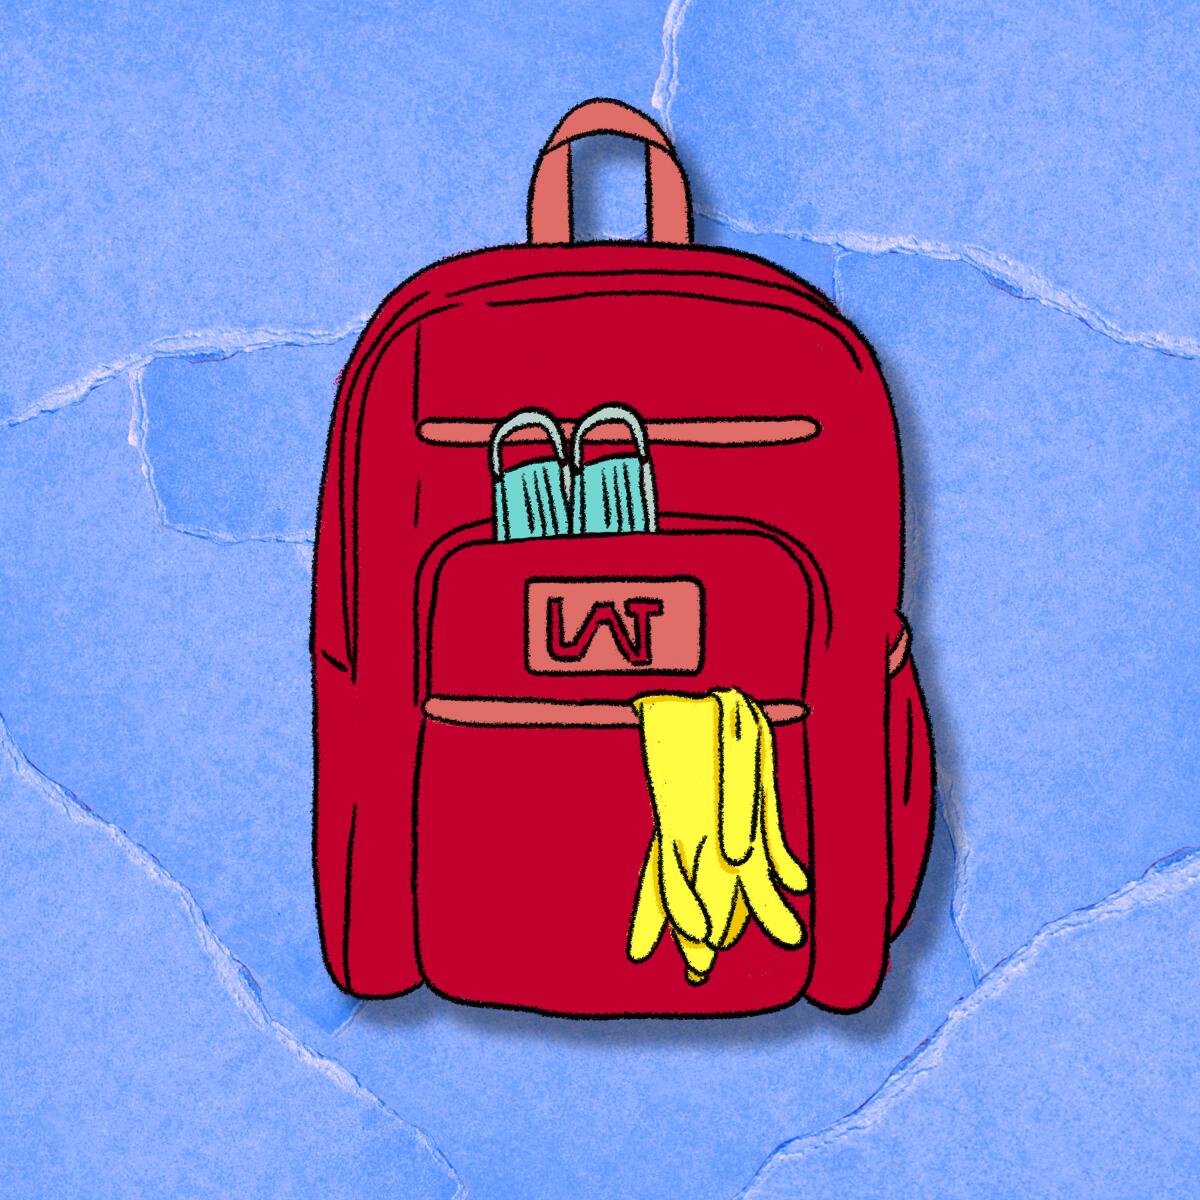 An illustration of a backpack with a mask and gloves hanging out.